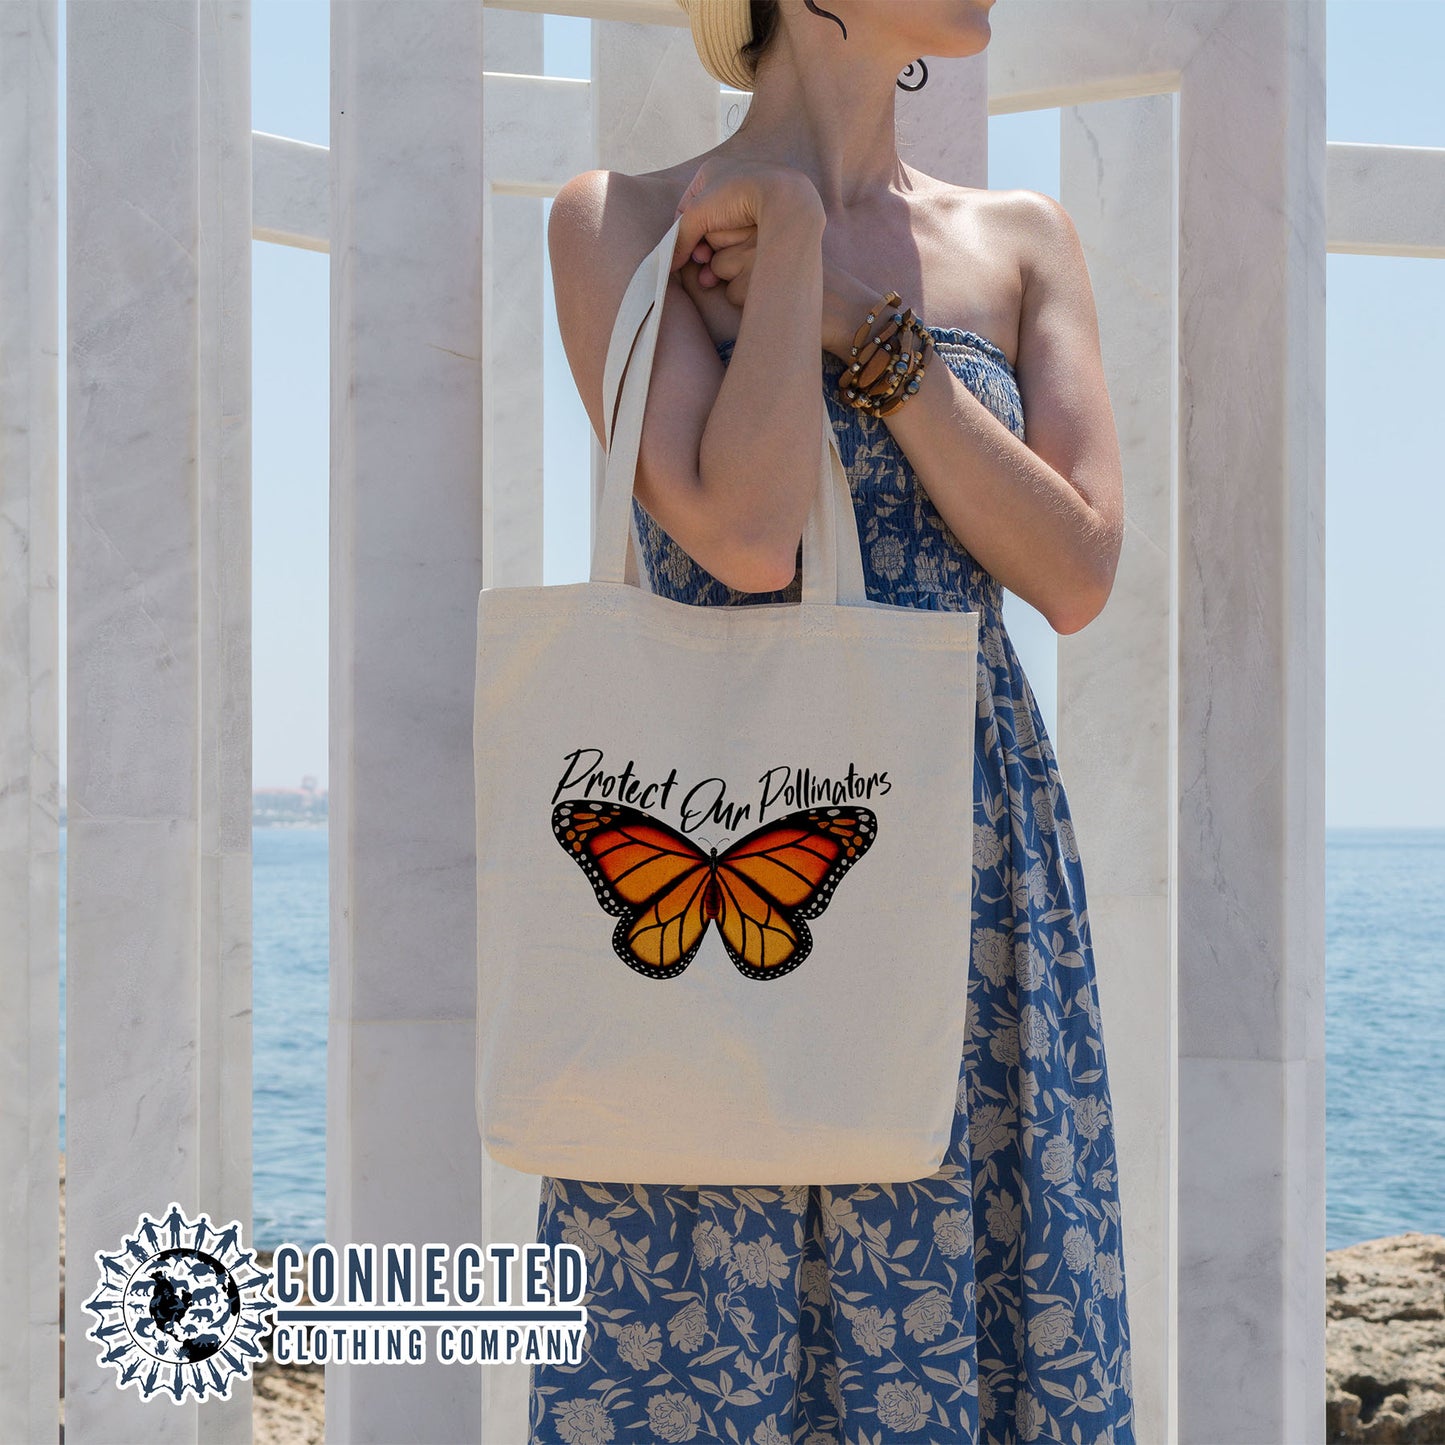 Protect Our Pollinators Tote Bag - Connected Clothing Company - 10% of proceeds donated to save the monarch butterflies